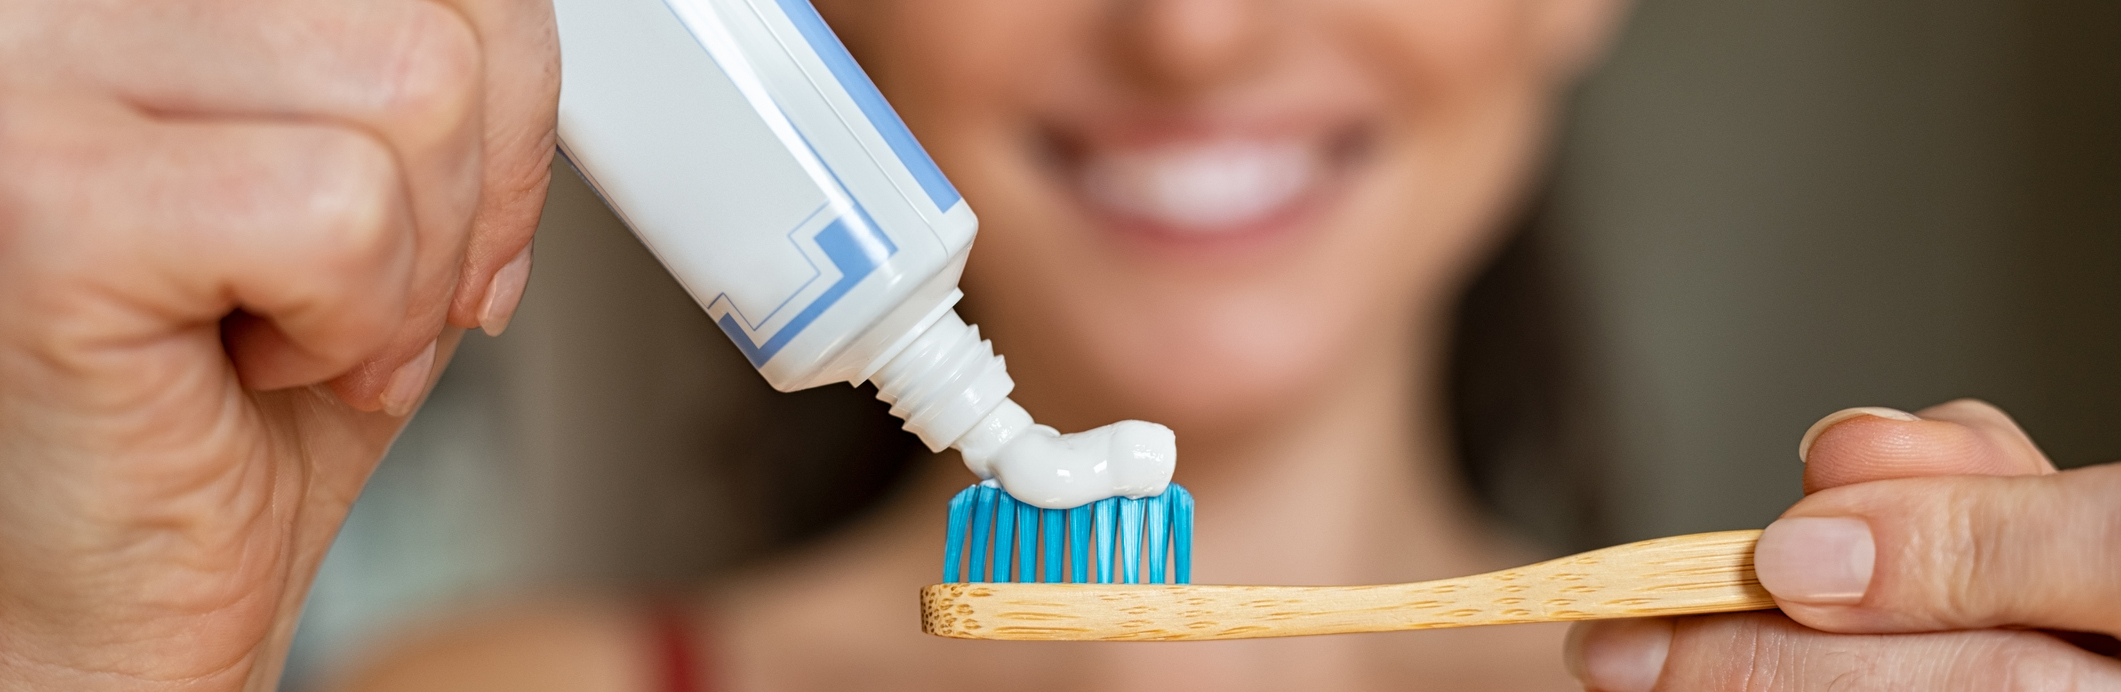 Close up of woman with tooth brush applying paste in bathroom. Closeup of girl hands squeezing toothpaste on ecological wooden brush. Smiling beautiful woman applying toothpaste on eco friendly toothbrush.